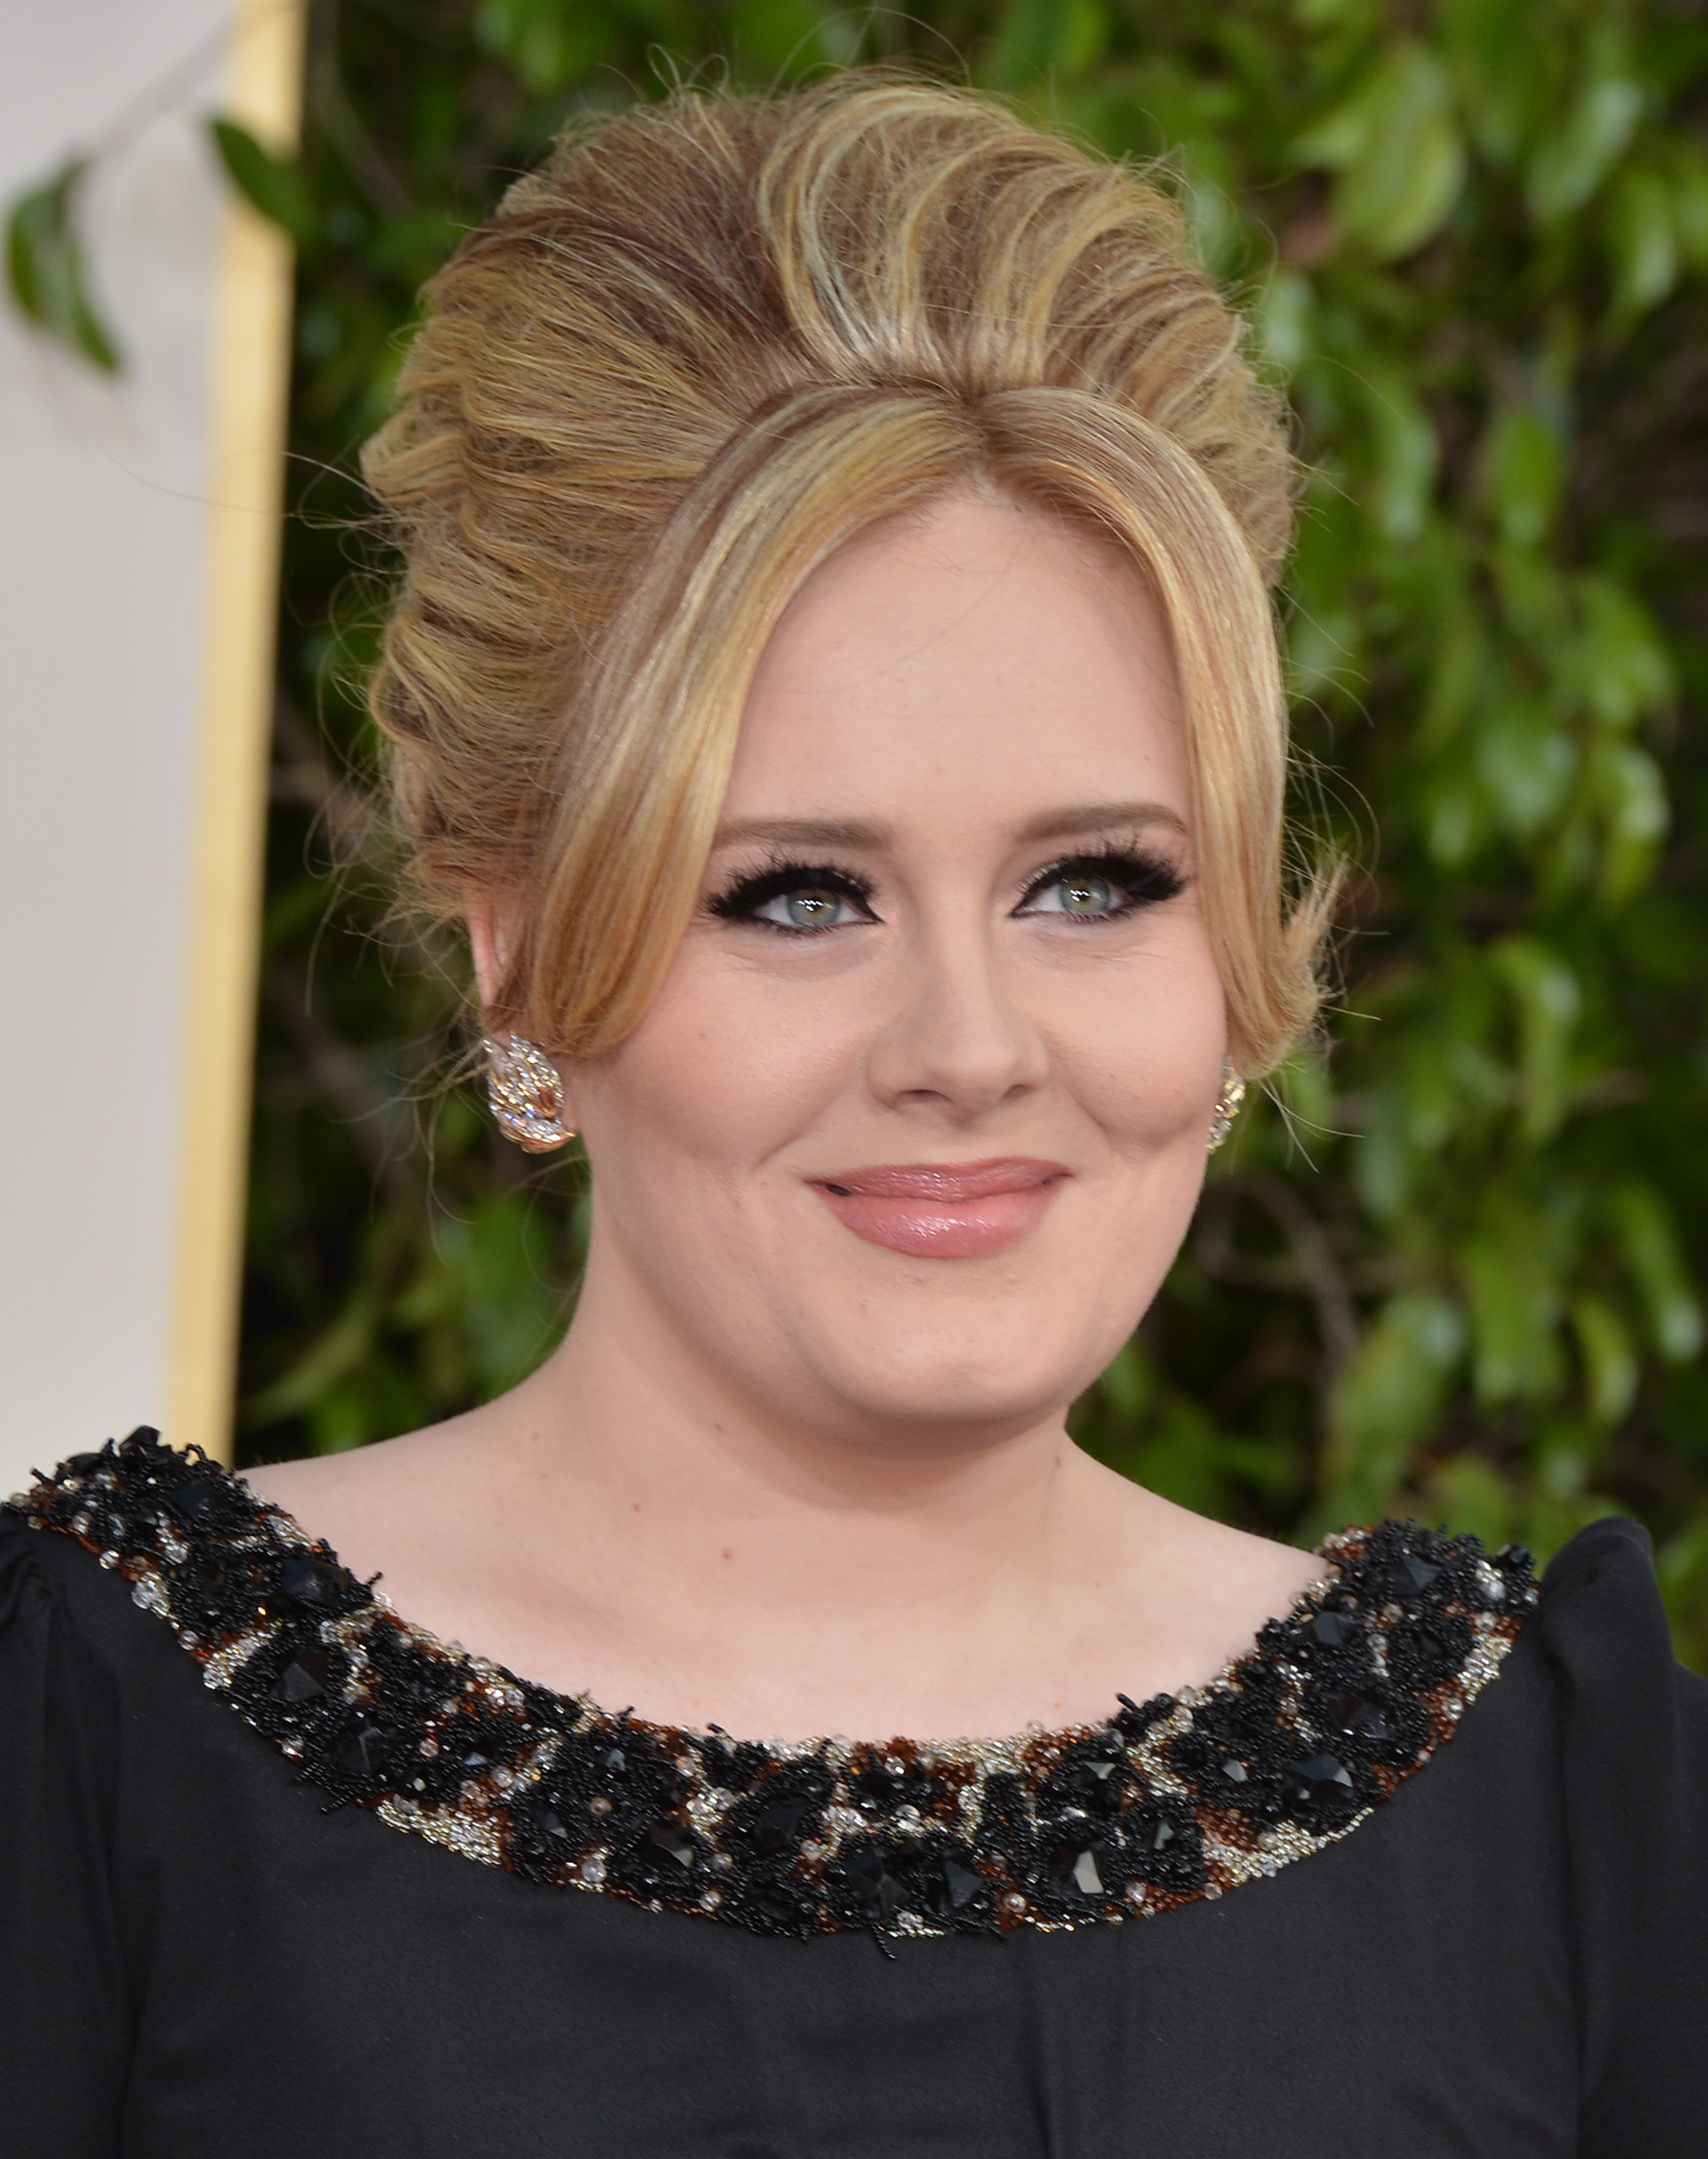 Adele smiling, wearing a embellished dress with an updo hairstyle at an event